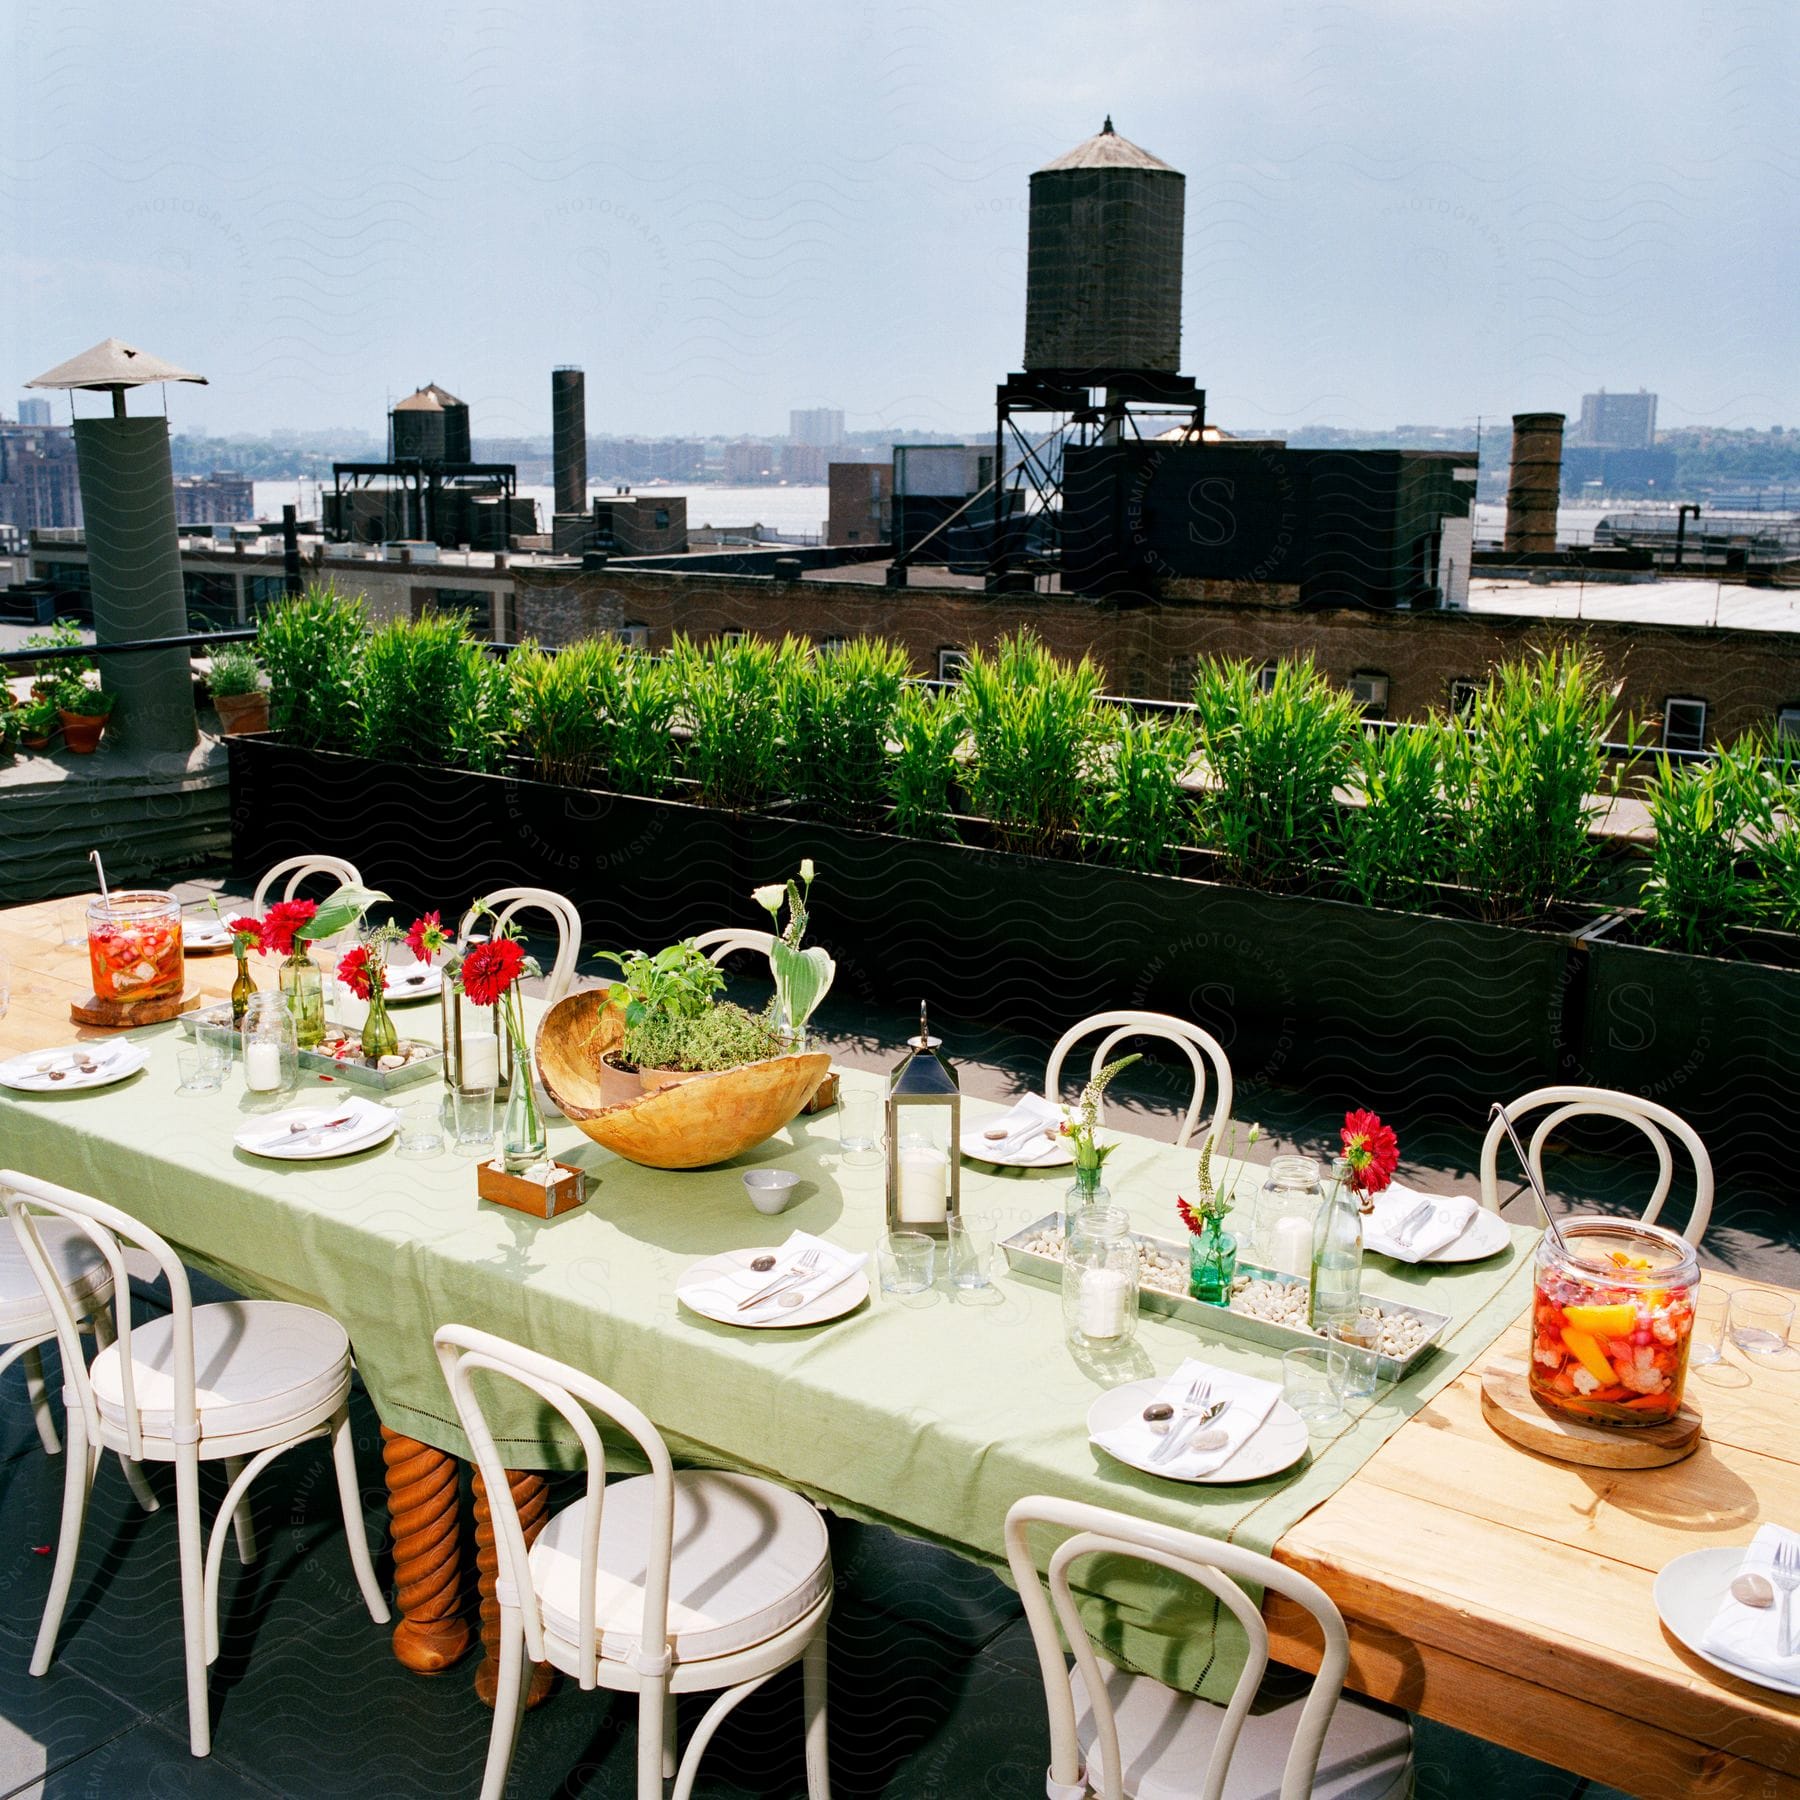 A scene of a dining table set with food and drink on an outdoor terrace